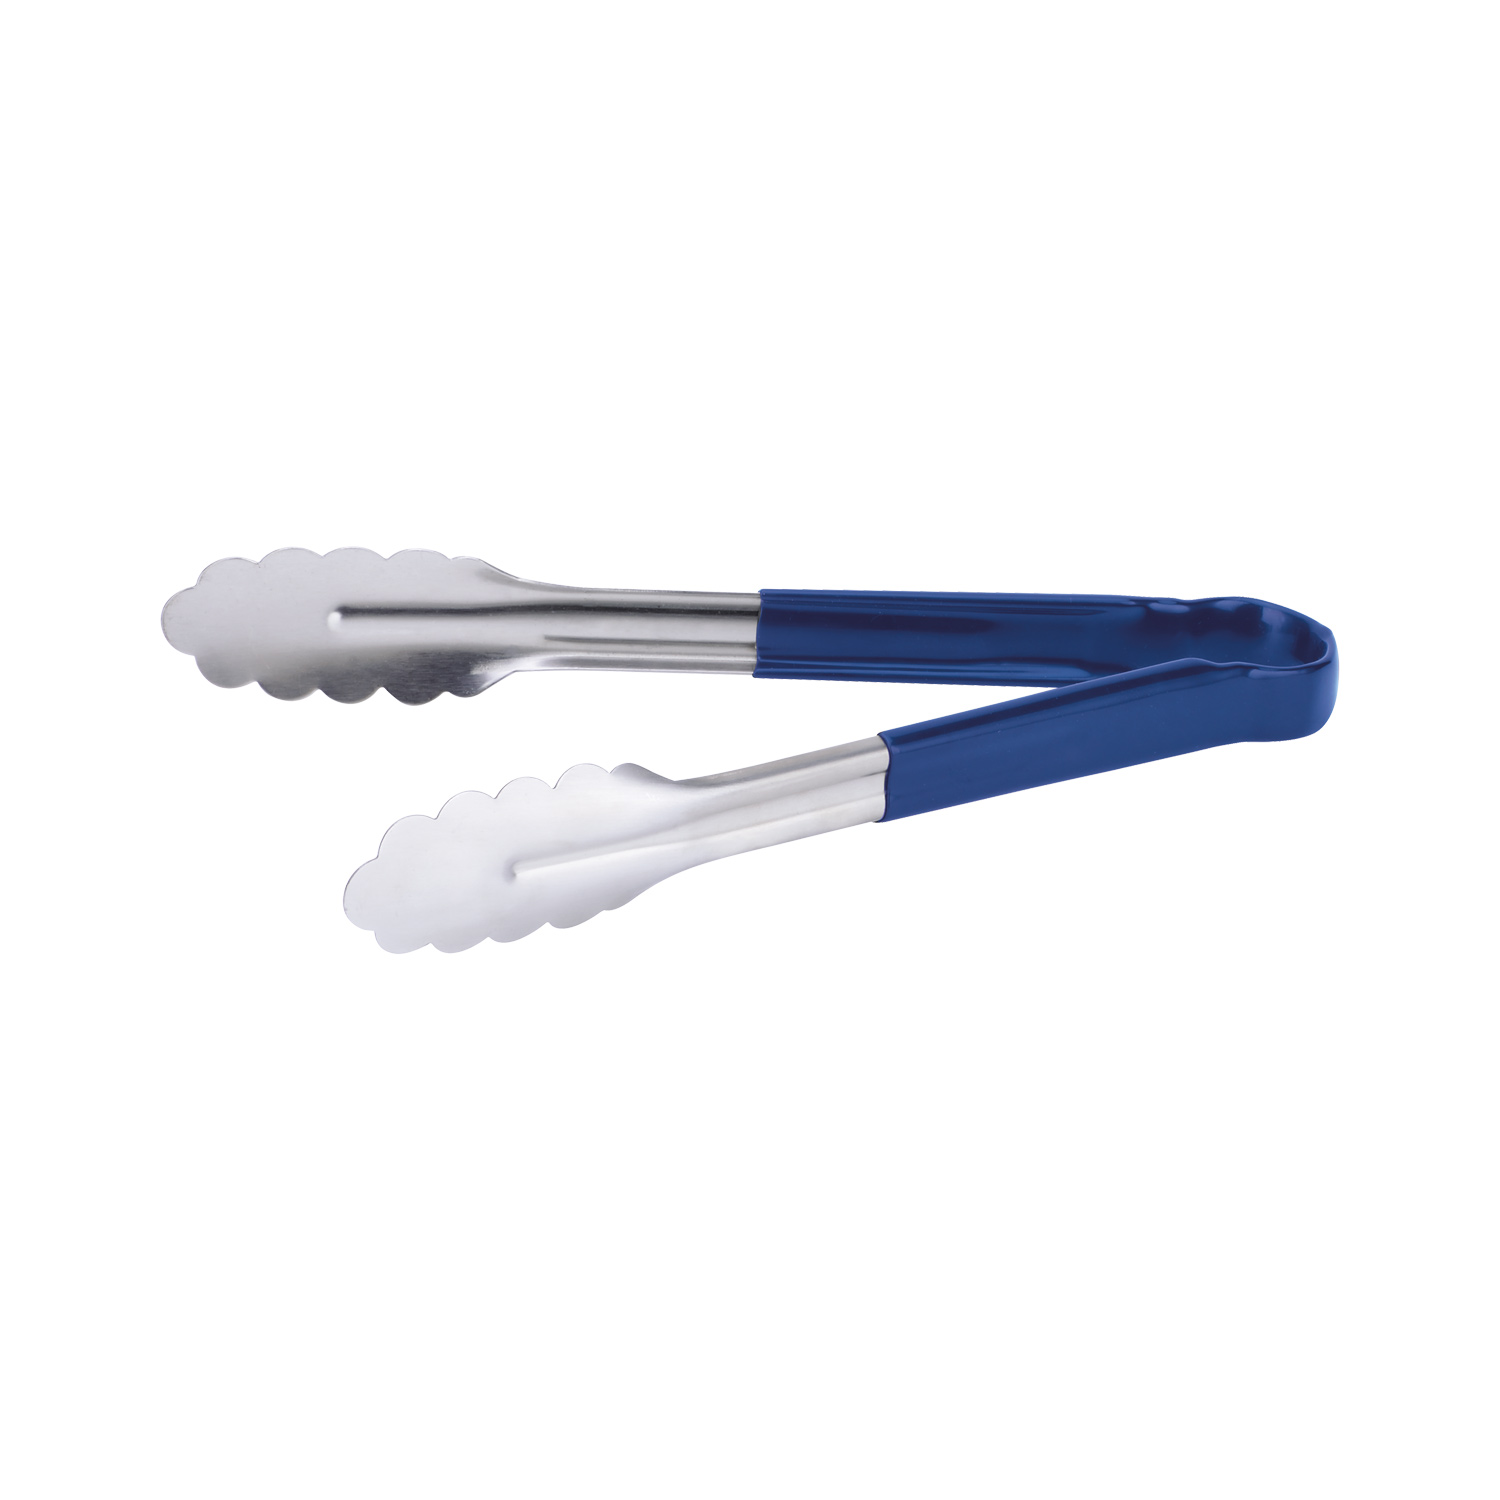 CAC China STCH-10BL Heavy Duty Stainless Steel Tongs with Blue Handle, 10" 